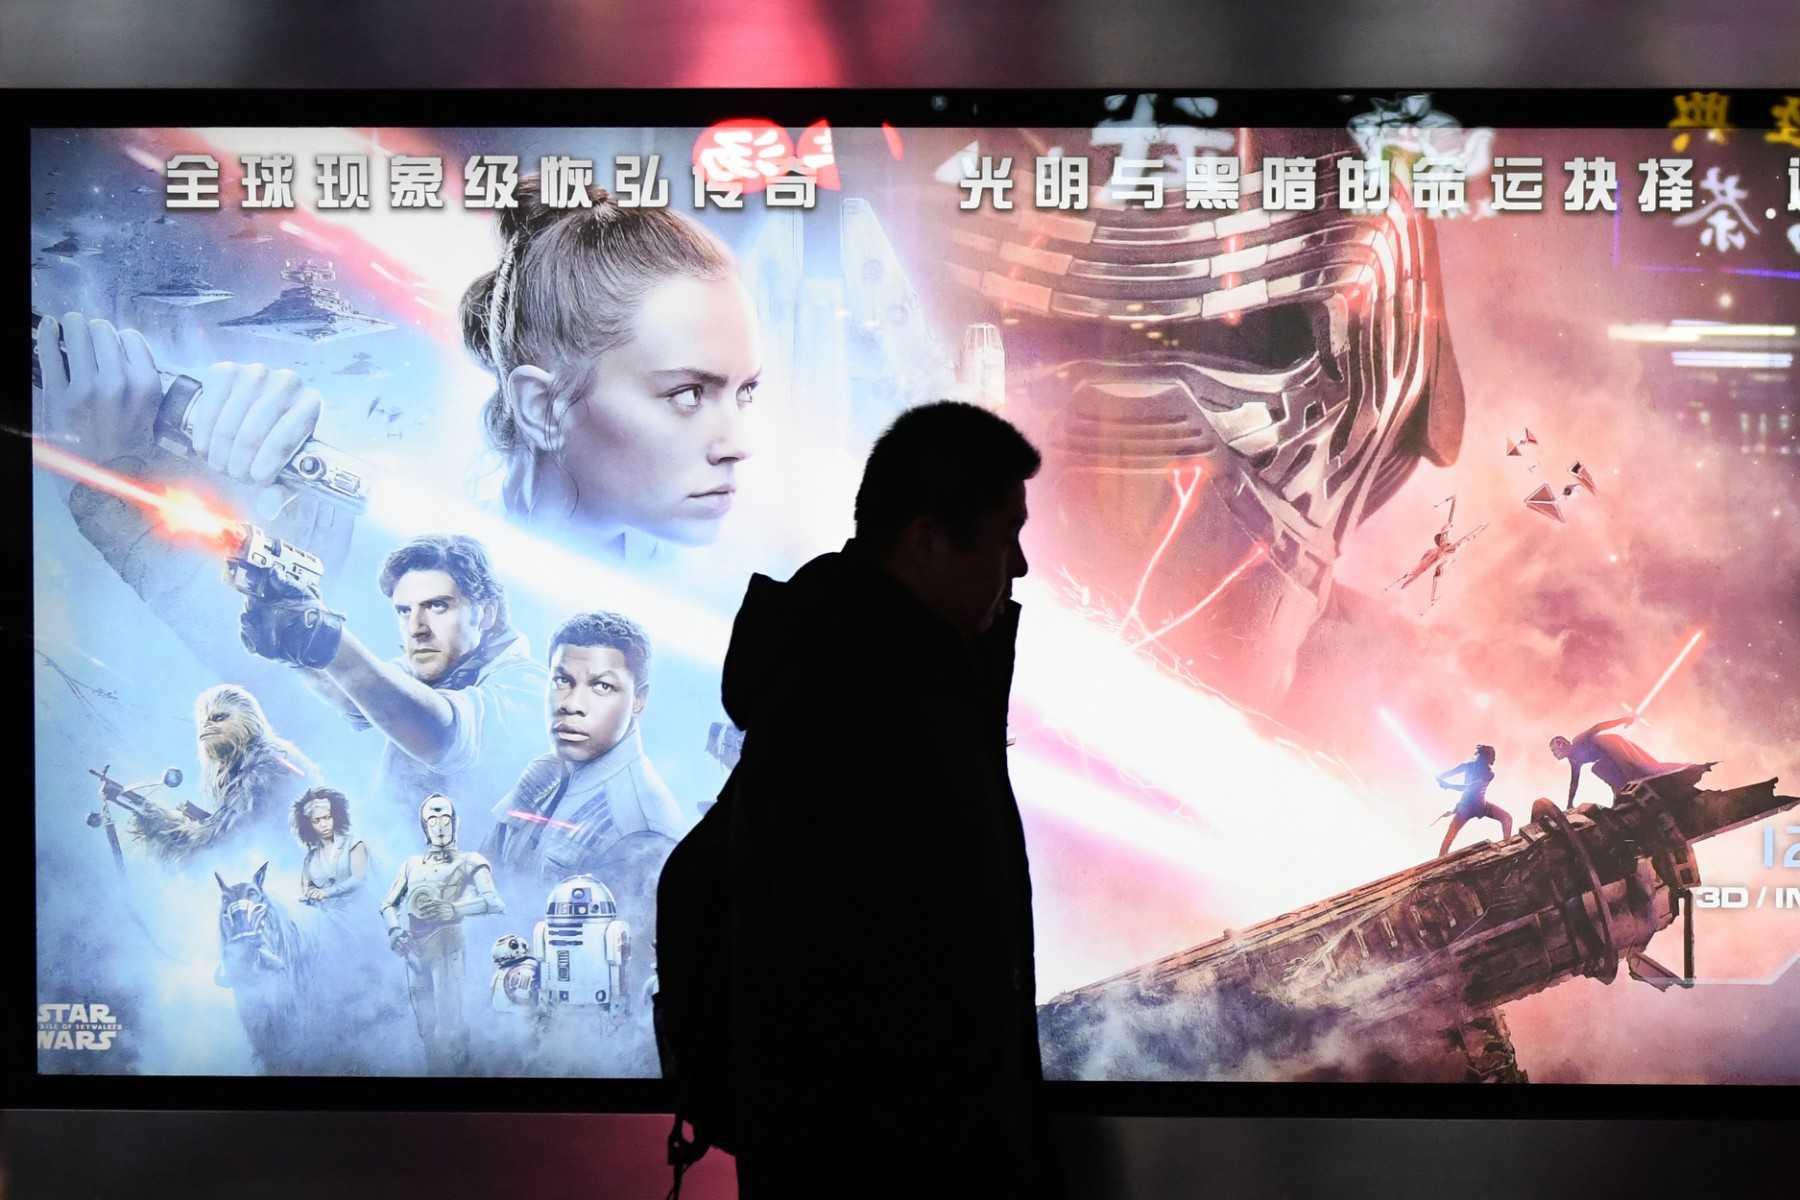 This photo taken on Dec 19, 2019 shows a man walking past a poster for the Star Wars movie, 'The Rise of Skywalker', in Beijing. Photo: AFP